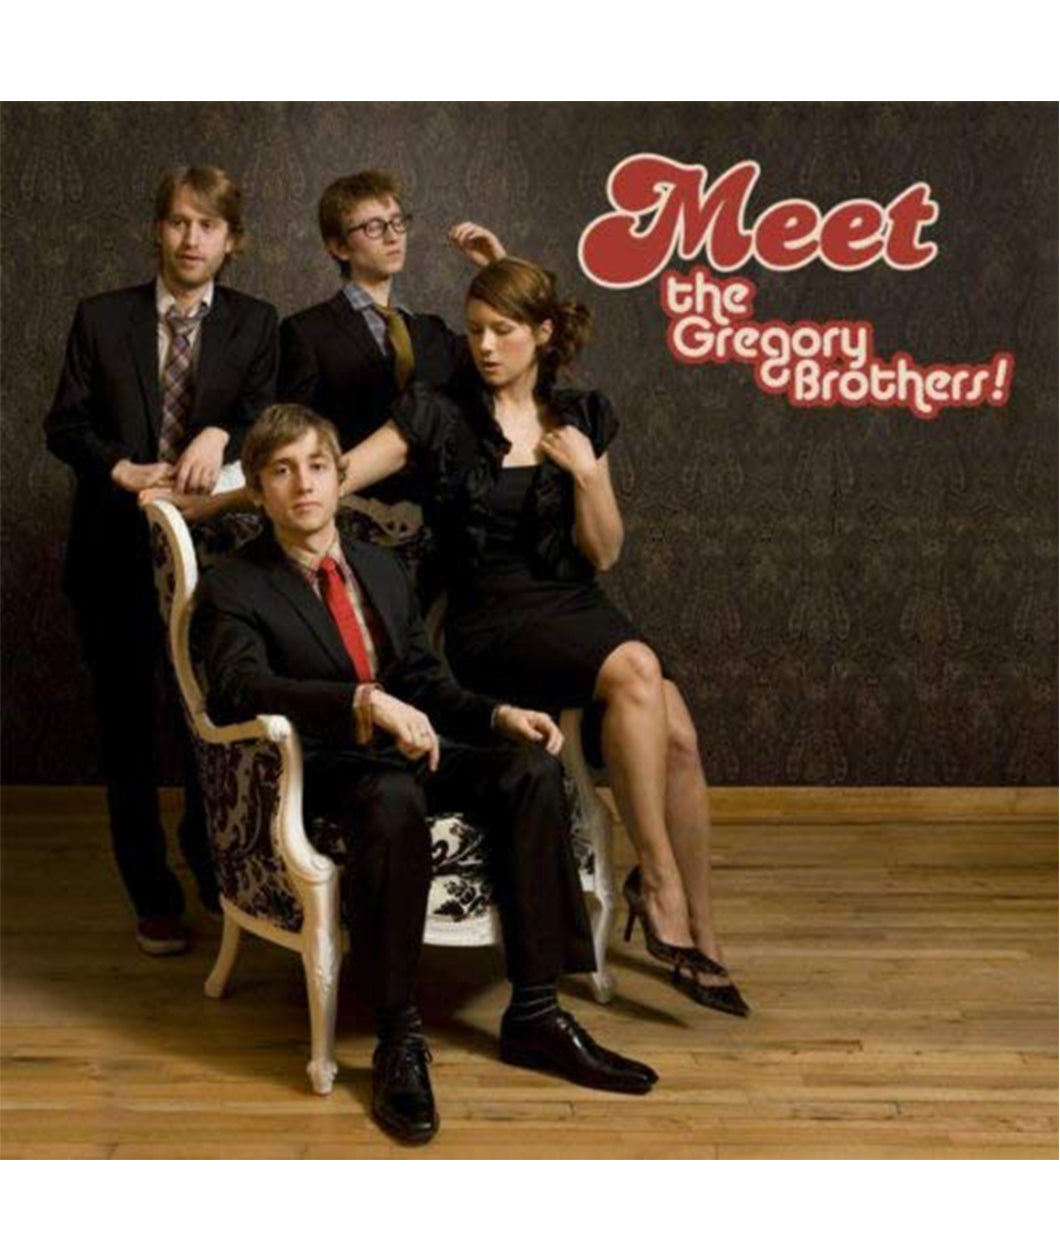 An album cover featuring four people posed in suits and a dress. On the cover it reads "Meet the Gregory Brothers!". 